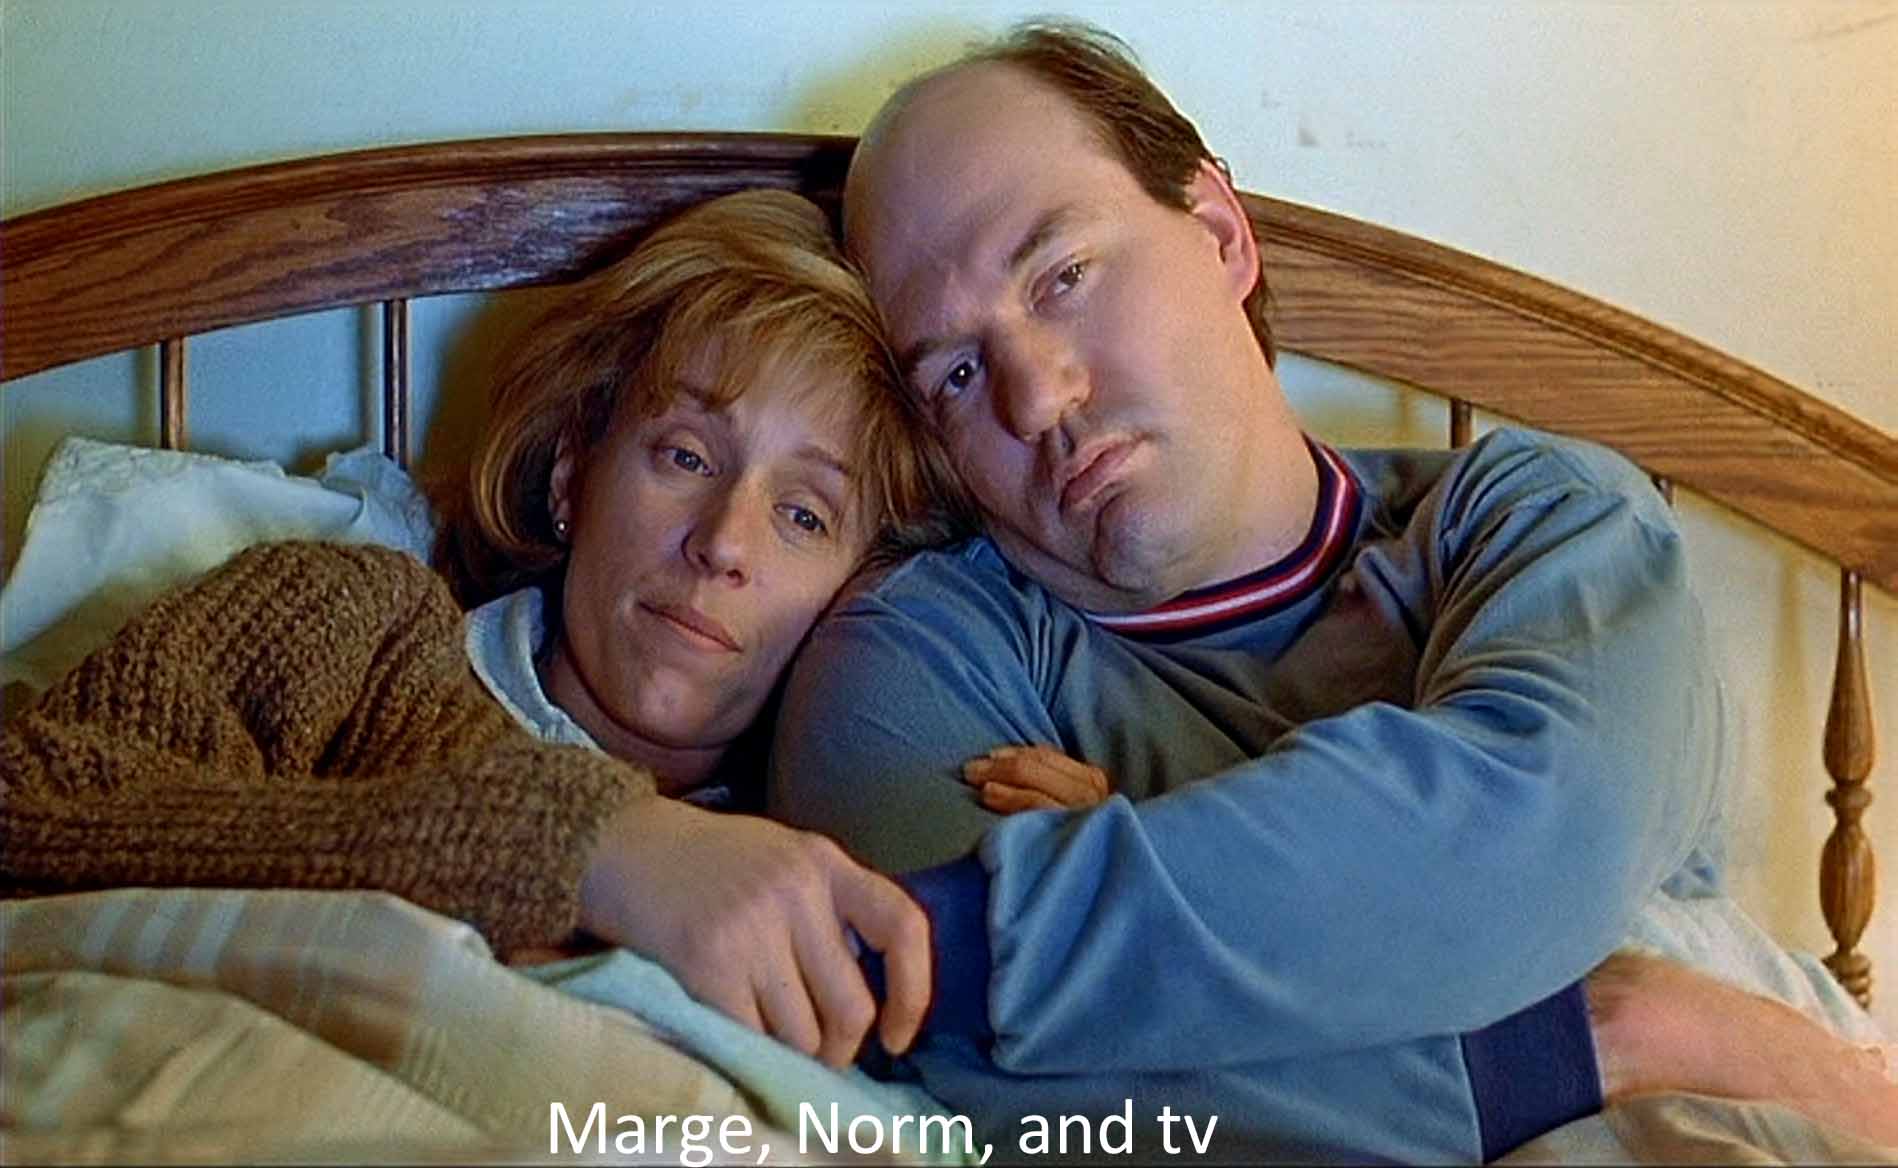 Marge, Norm, and tv